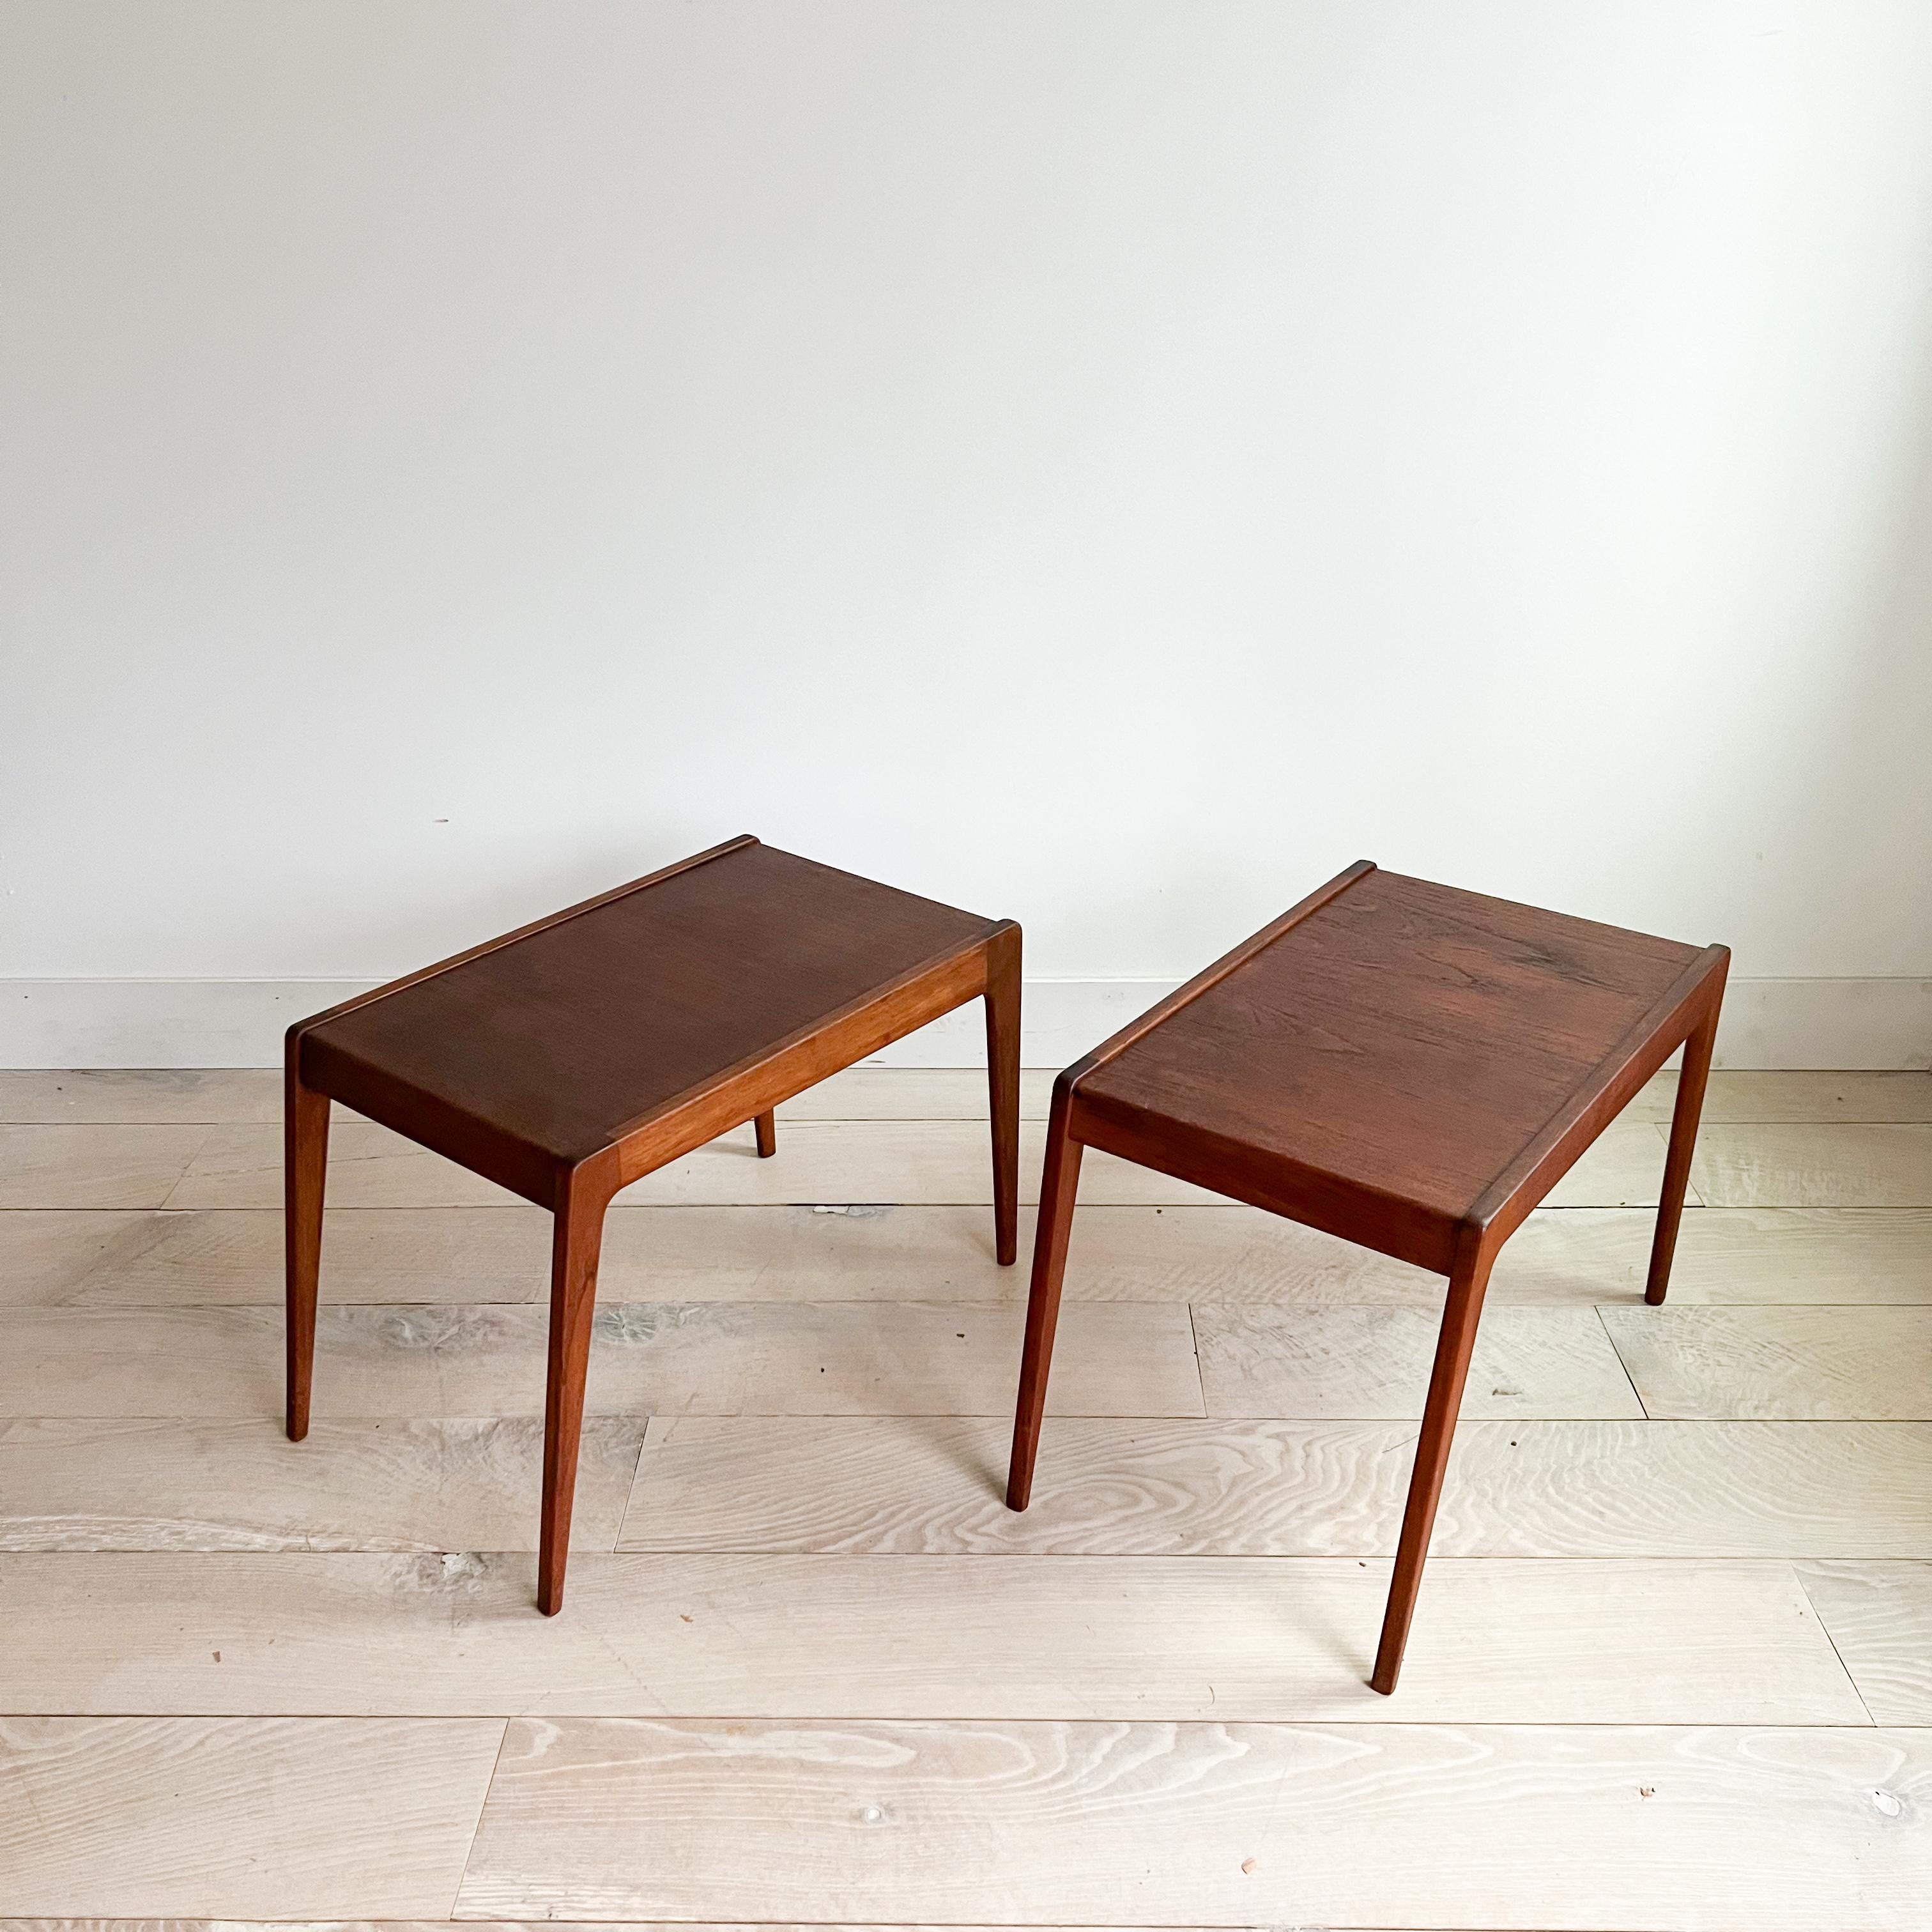 Presenting a pair of mid-century modern Danish teak end tables crafted by Kurt Ostervig for Jason Mobler. These timeless pieces, measuring 16.5 inches by 25.75 inches, stand at a practical height of 18 inches.

Boasting the classic teak aesthetic,